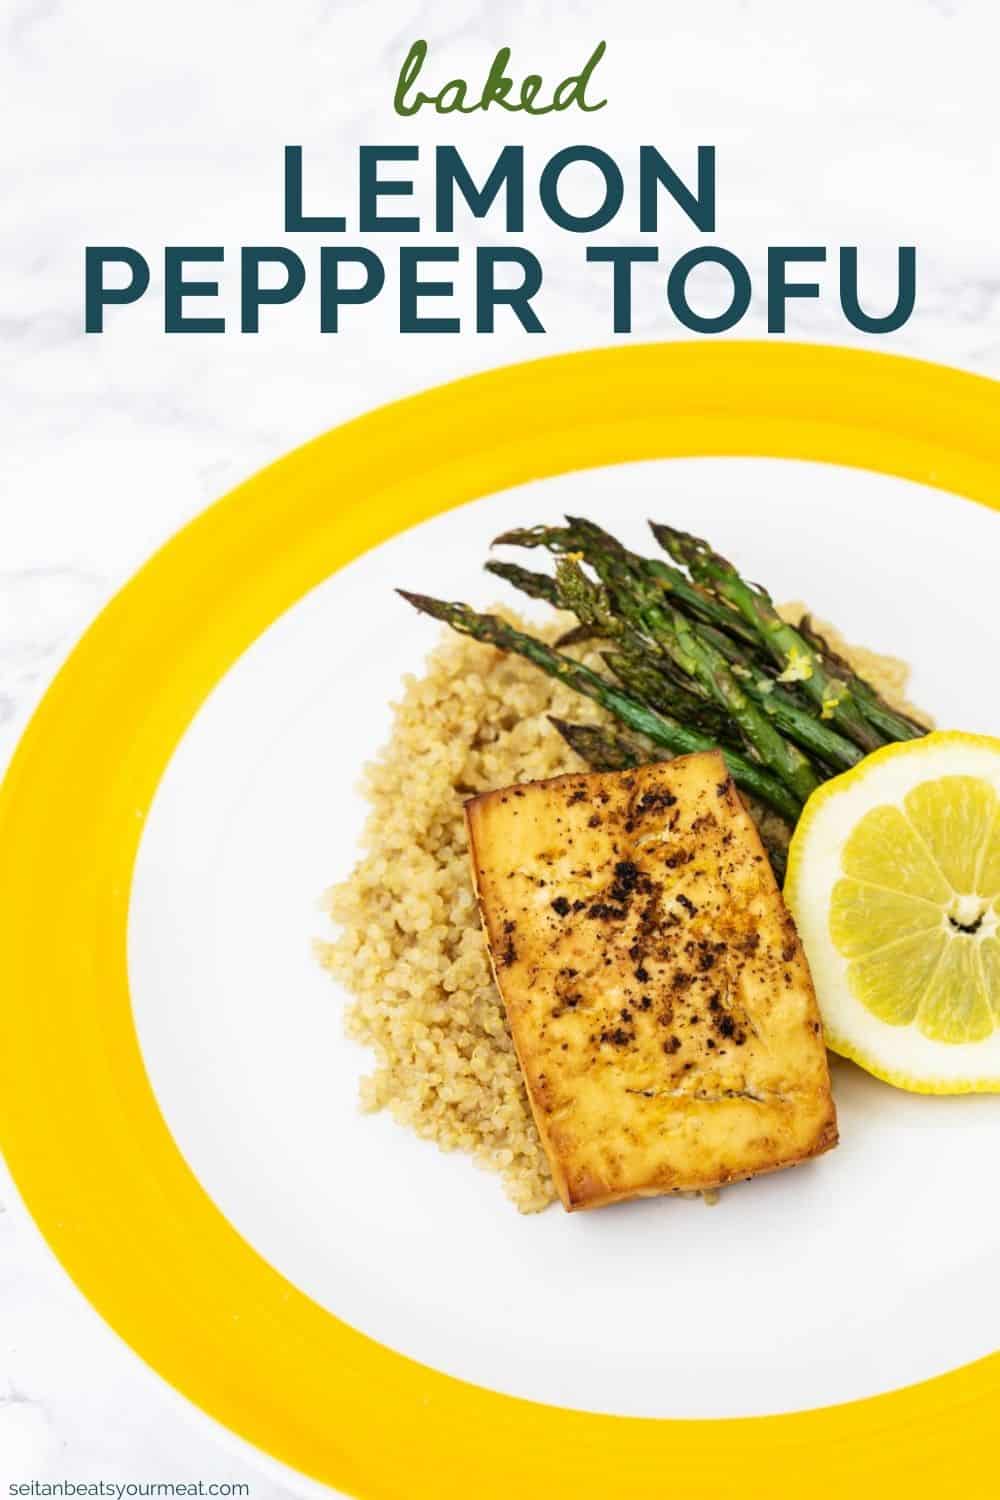 Plate of baked tofu with roasted asparagus and lemon slice on a bed of quinoa with text "Baked Lemon Pepper Tofu"